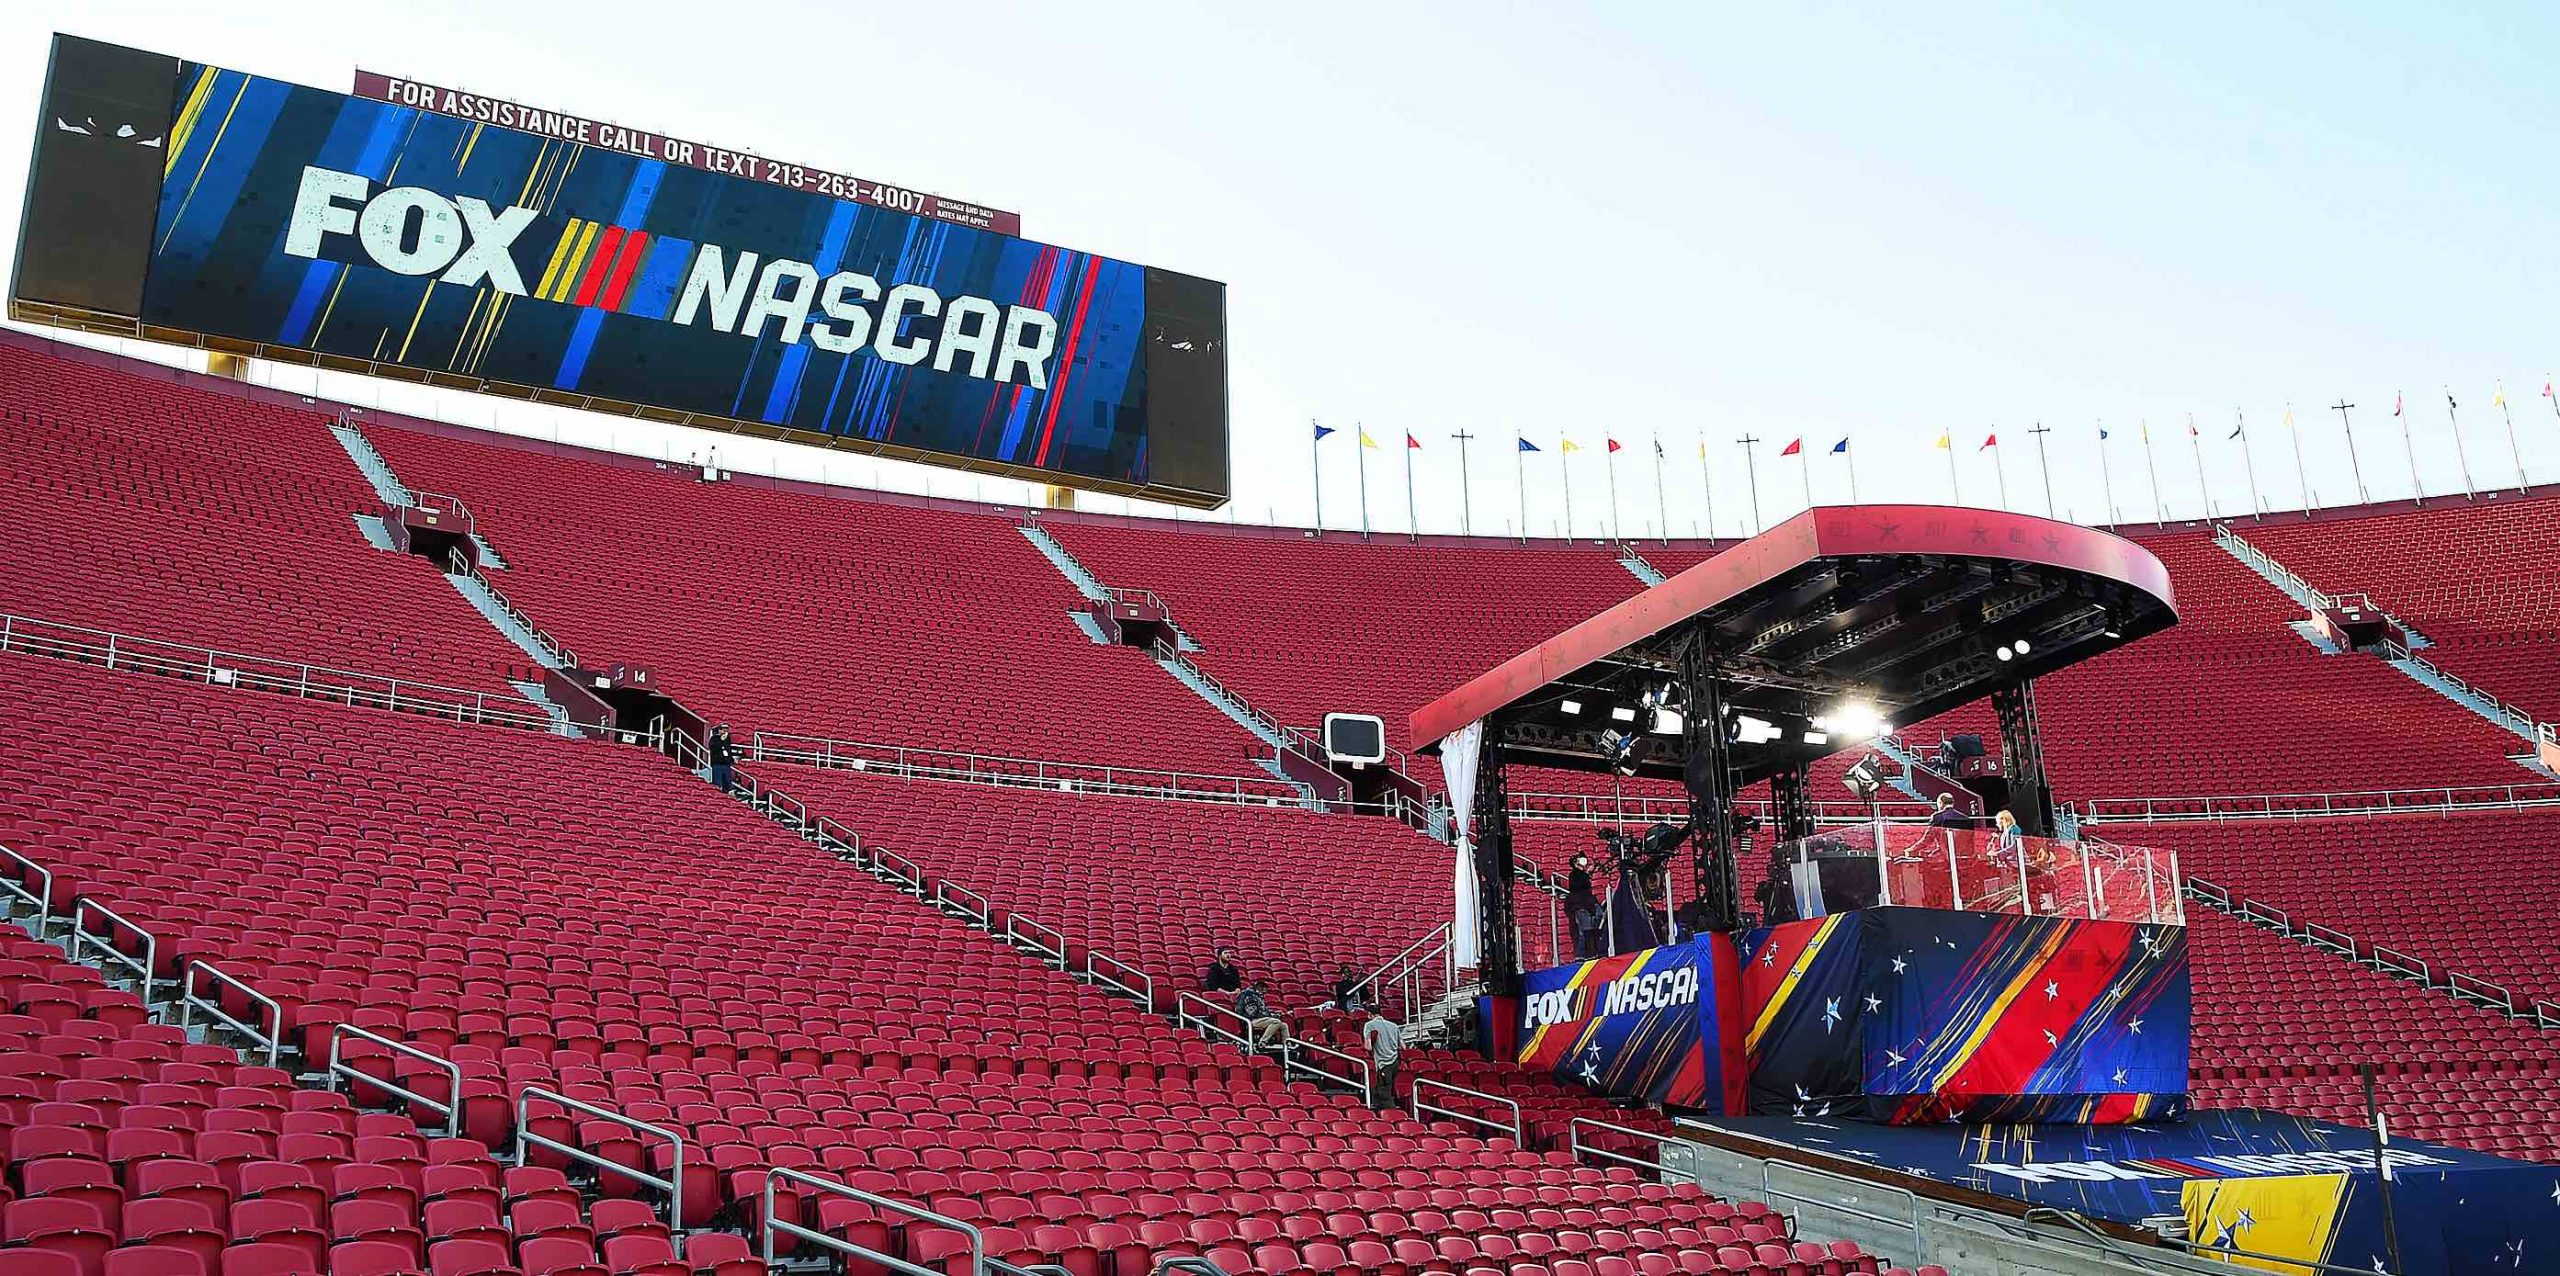 NASCAR Clash at the Coliseum Fox Sports Goes All Out With 1080p HDR Workflows at Historic Venue